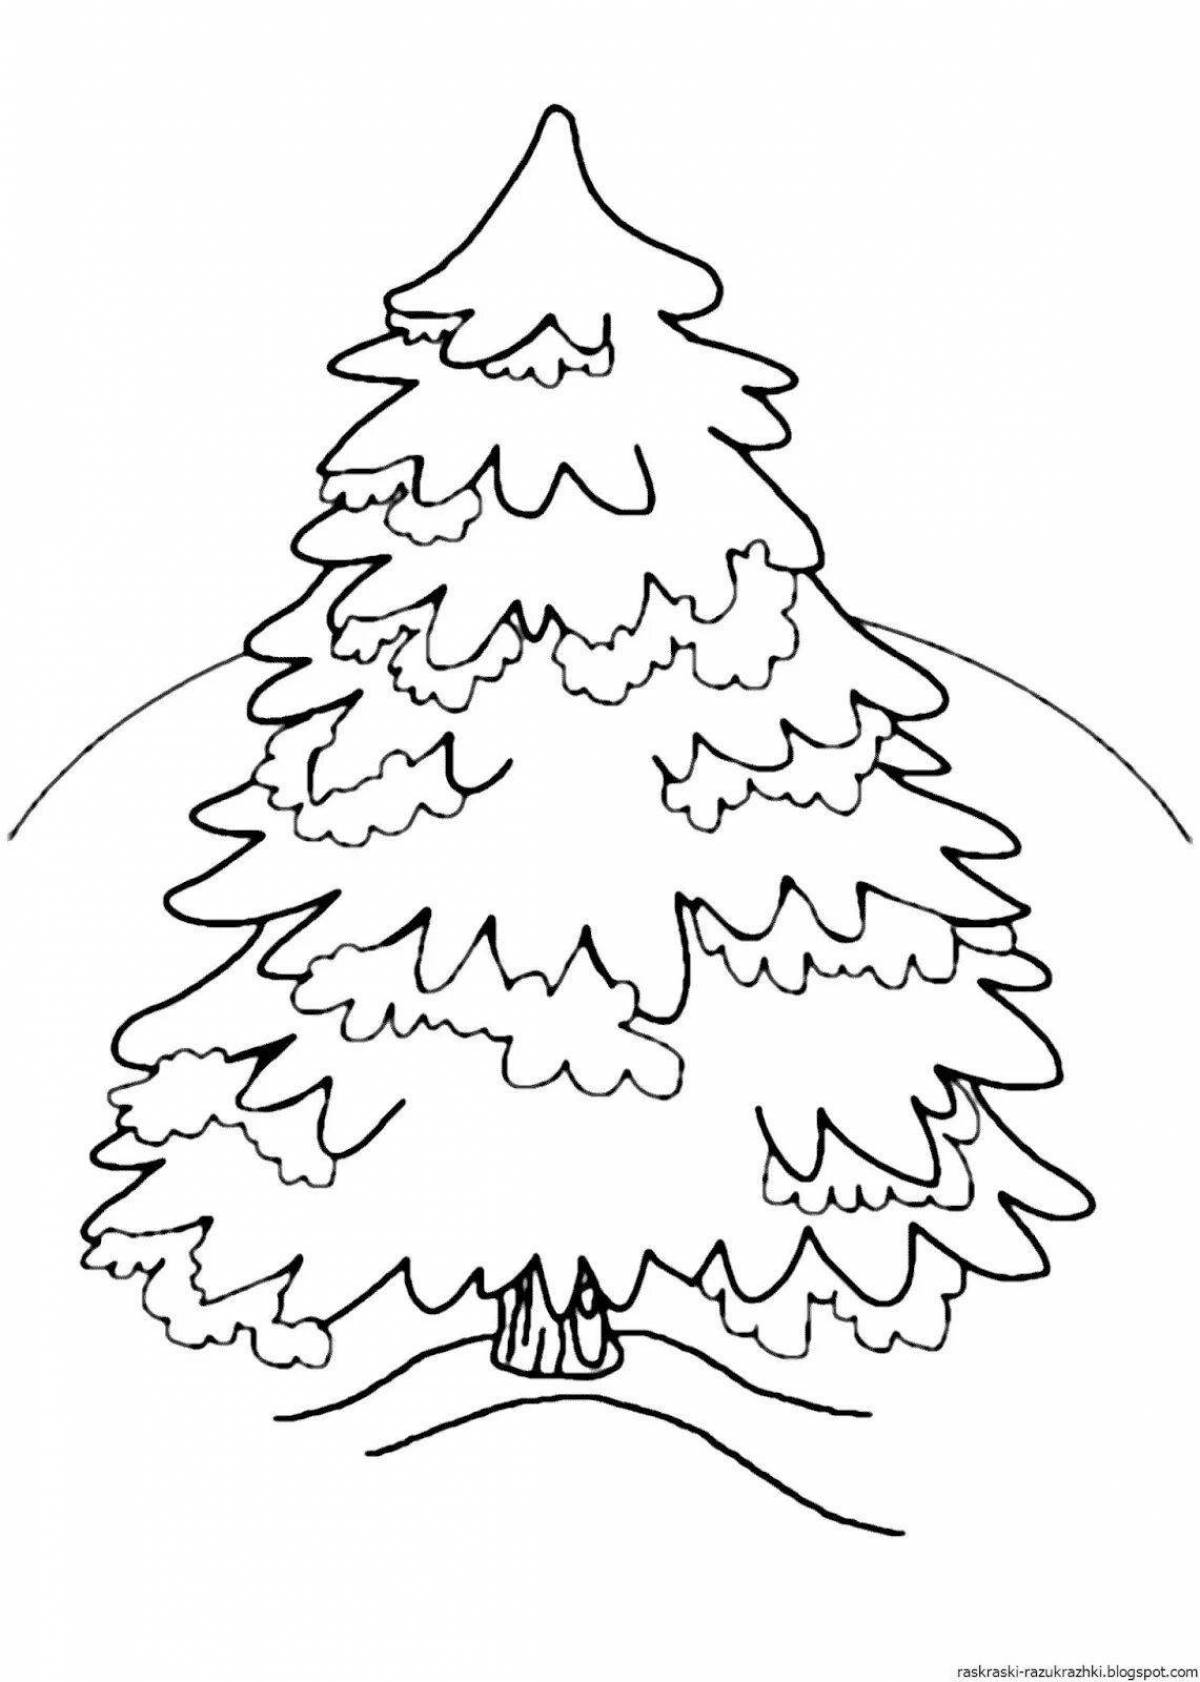 Bright Christmas tree coloring template